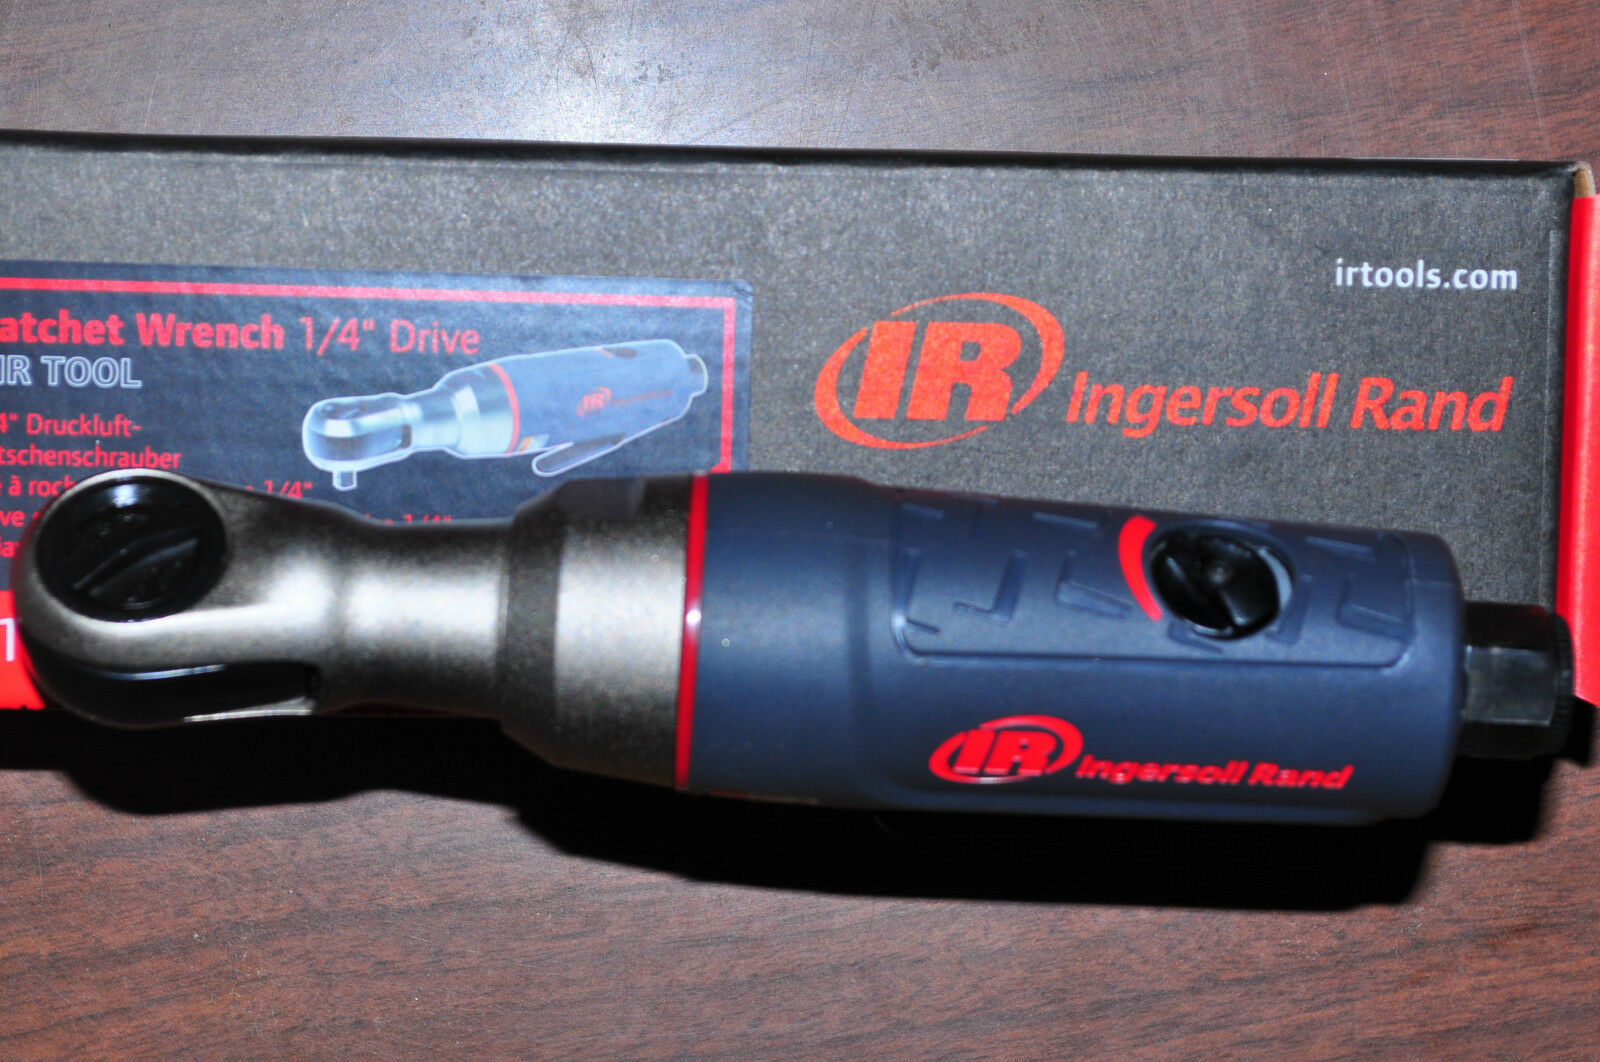 Composite Air Ratchet 1105max-d2 for sale online Ingersoll Rand 1/4 In 